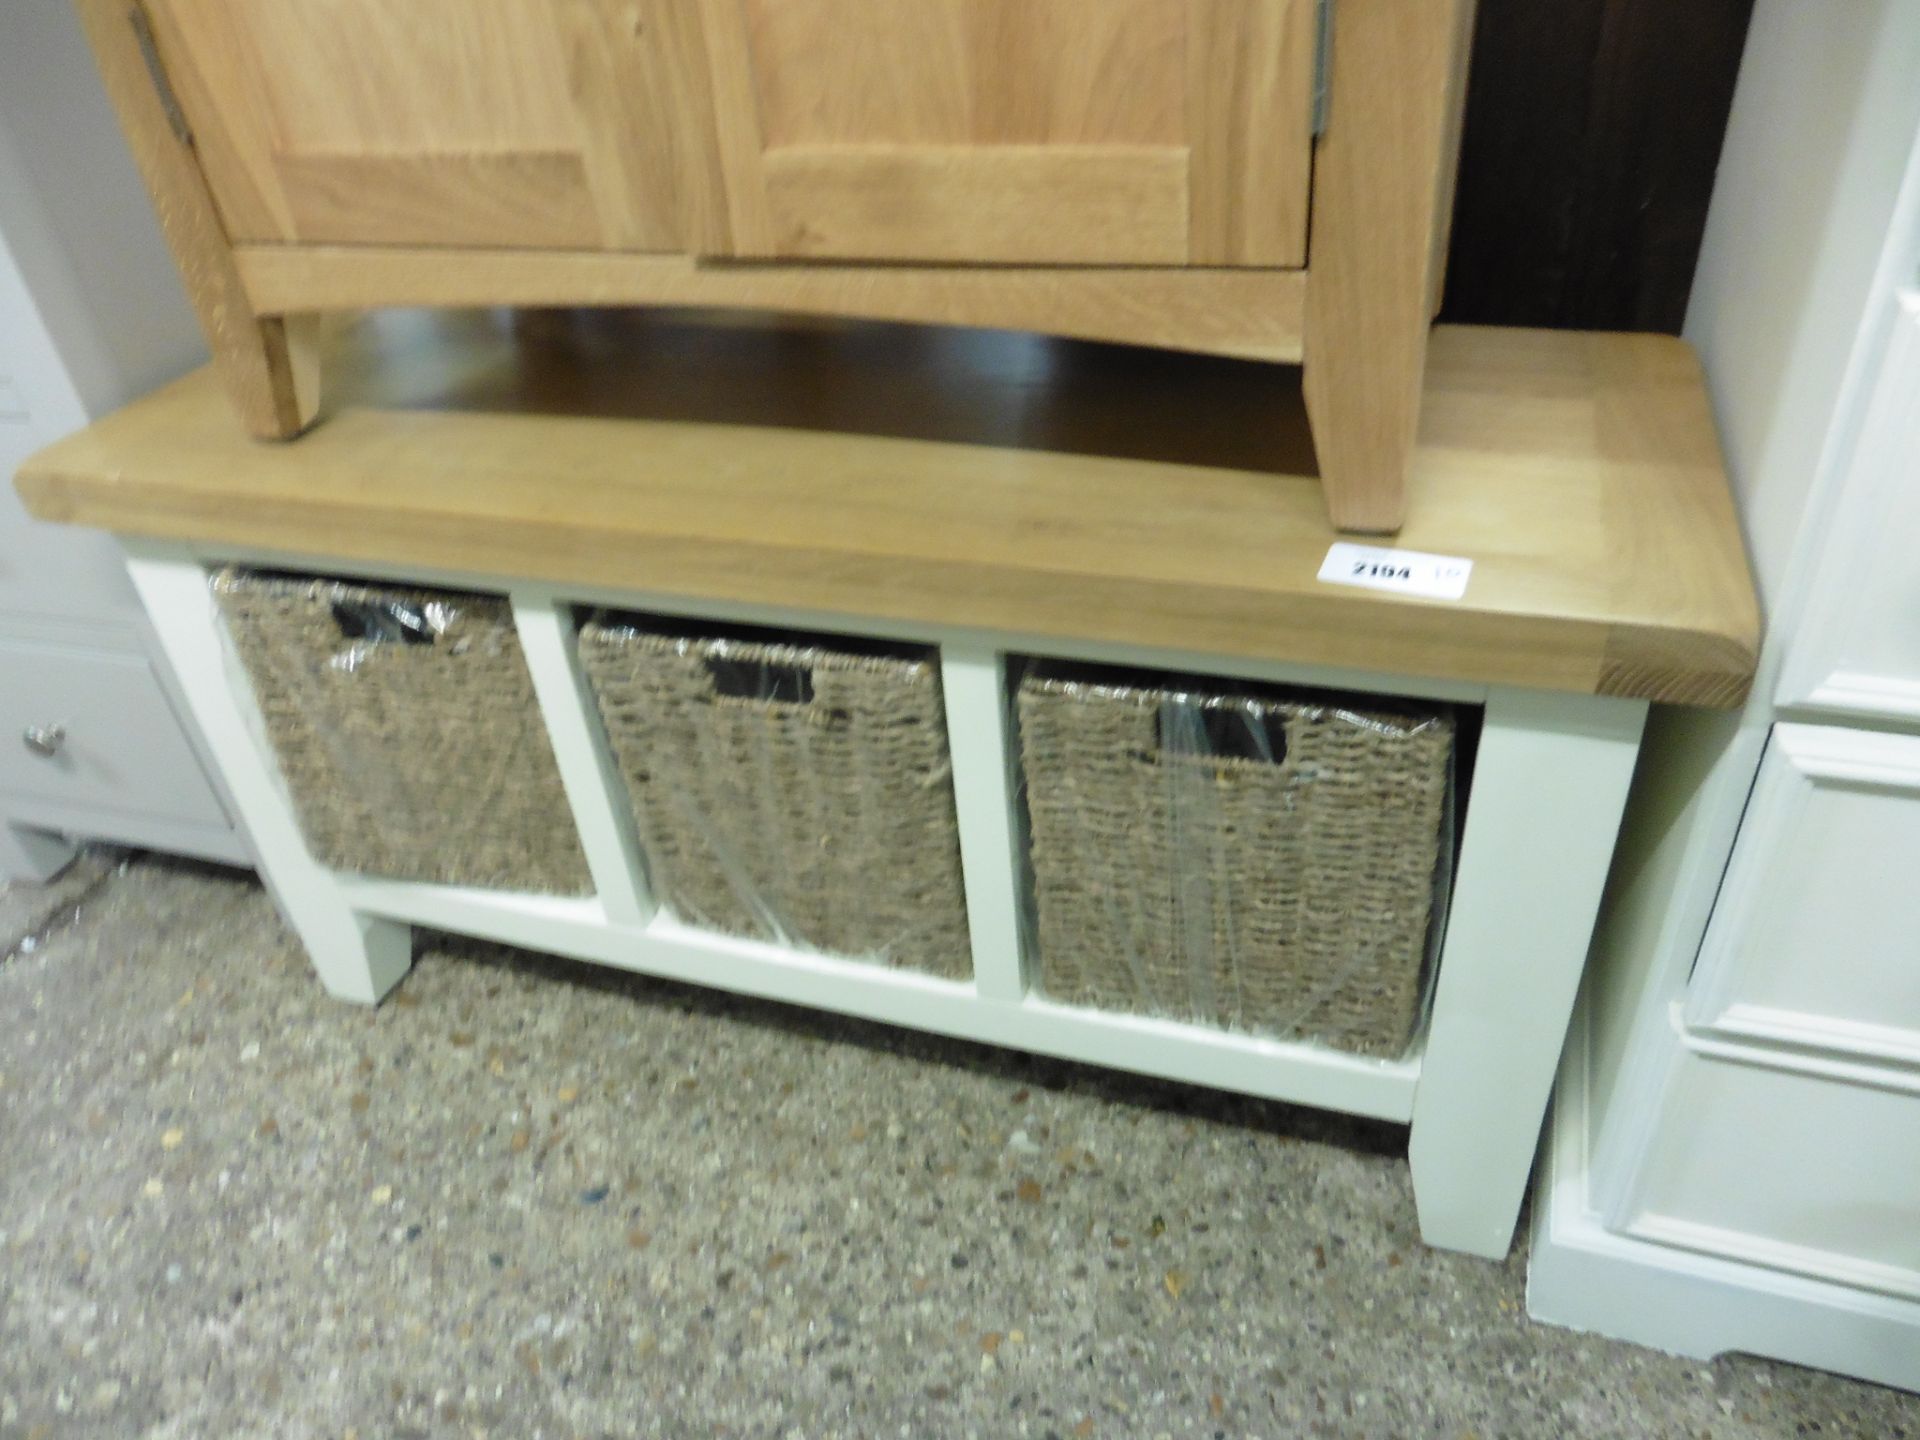 (10) Cream painted oak top bench seat with 3 seagrass storage baskets